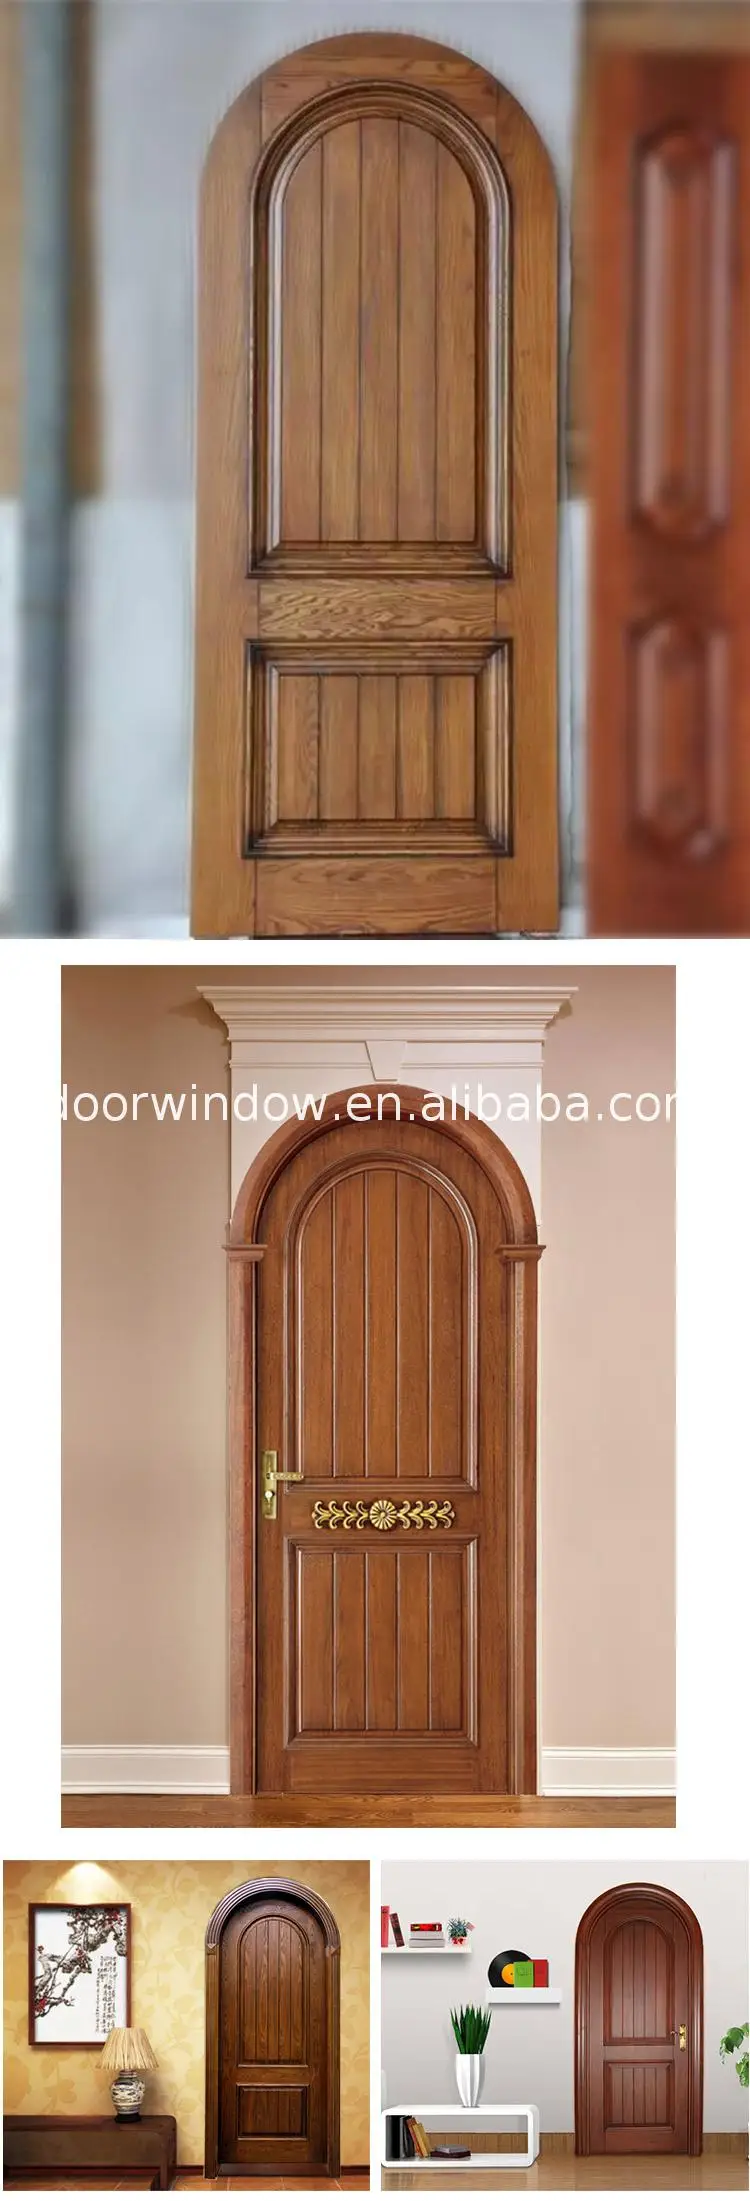 China Manufactory interior door options for large openings molding measurements